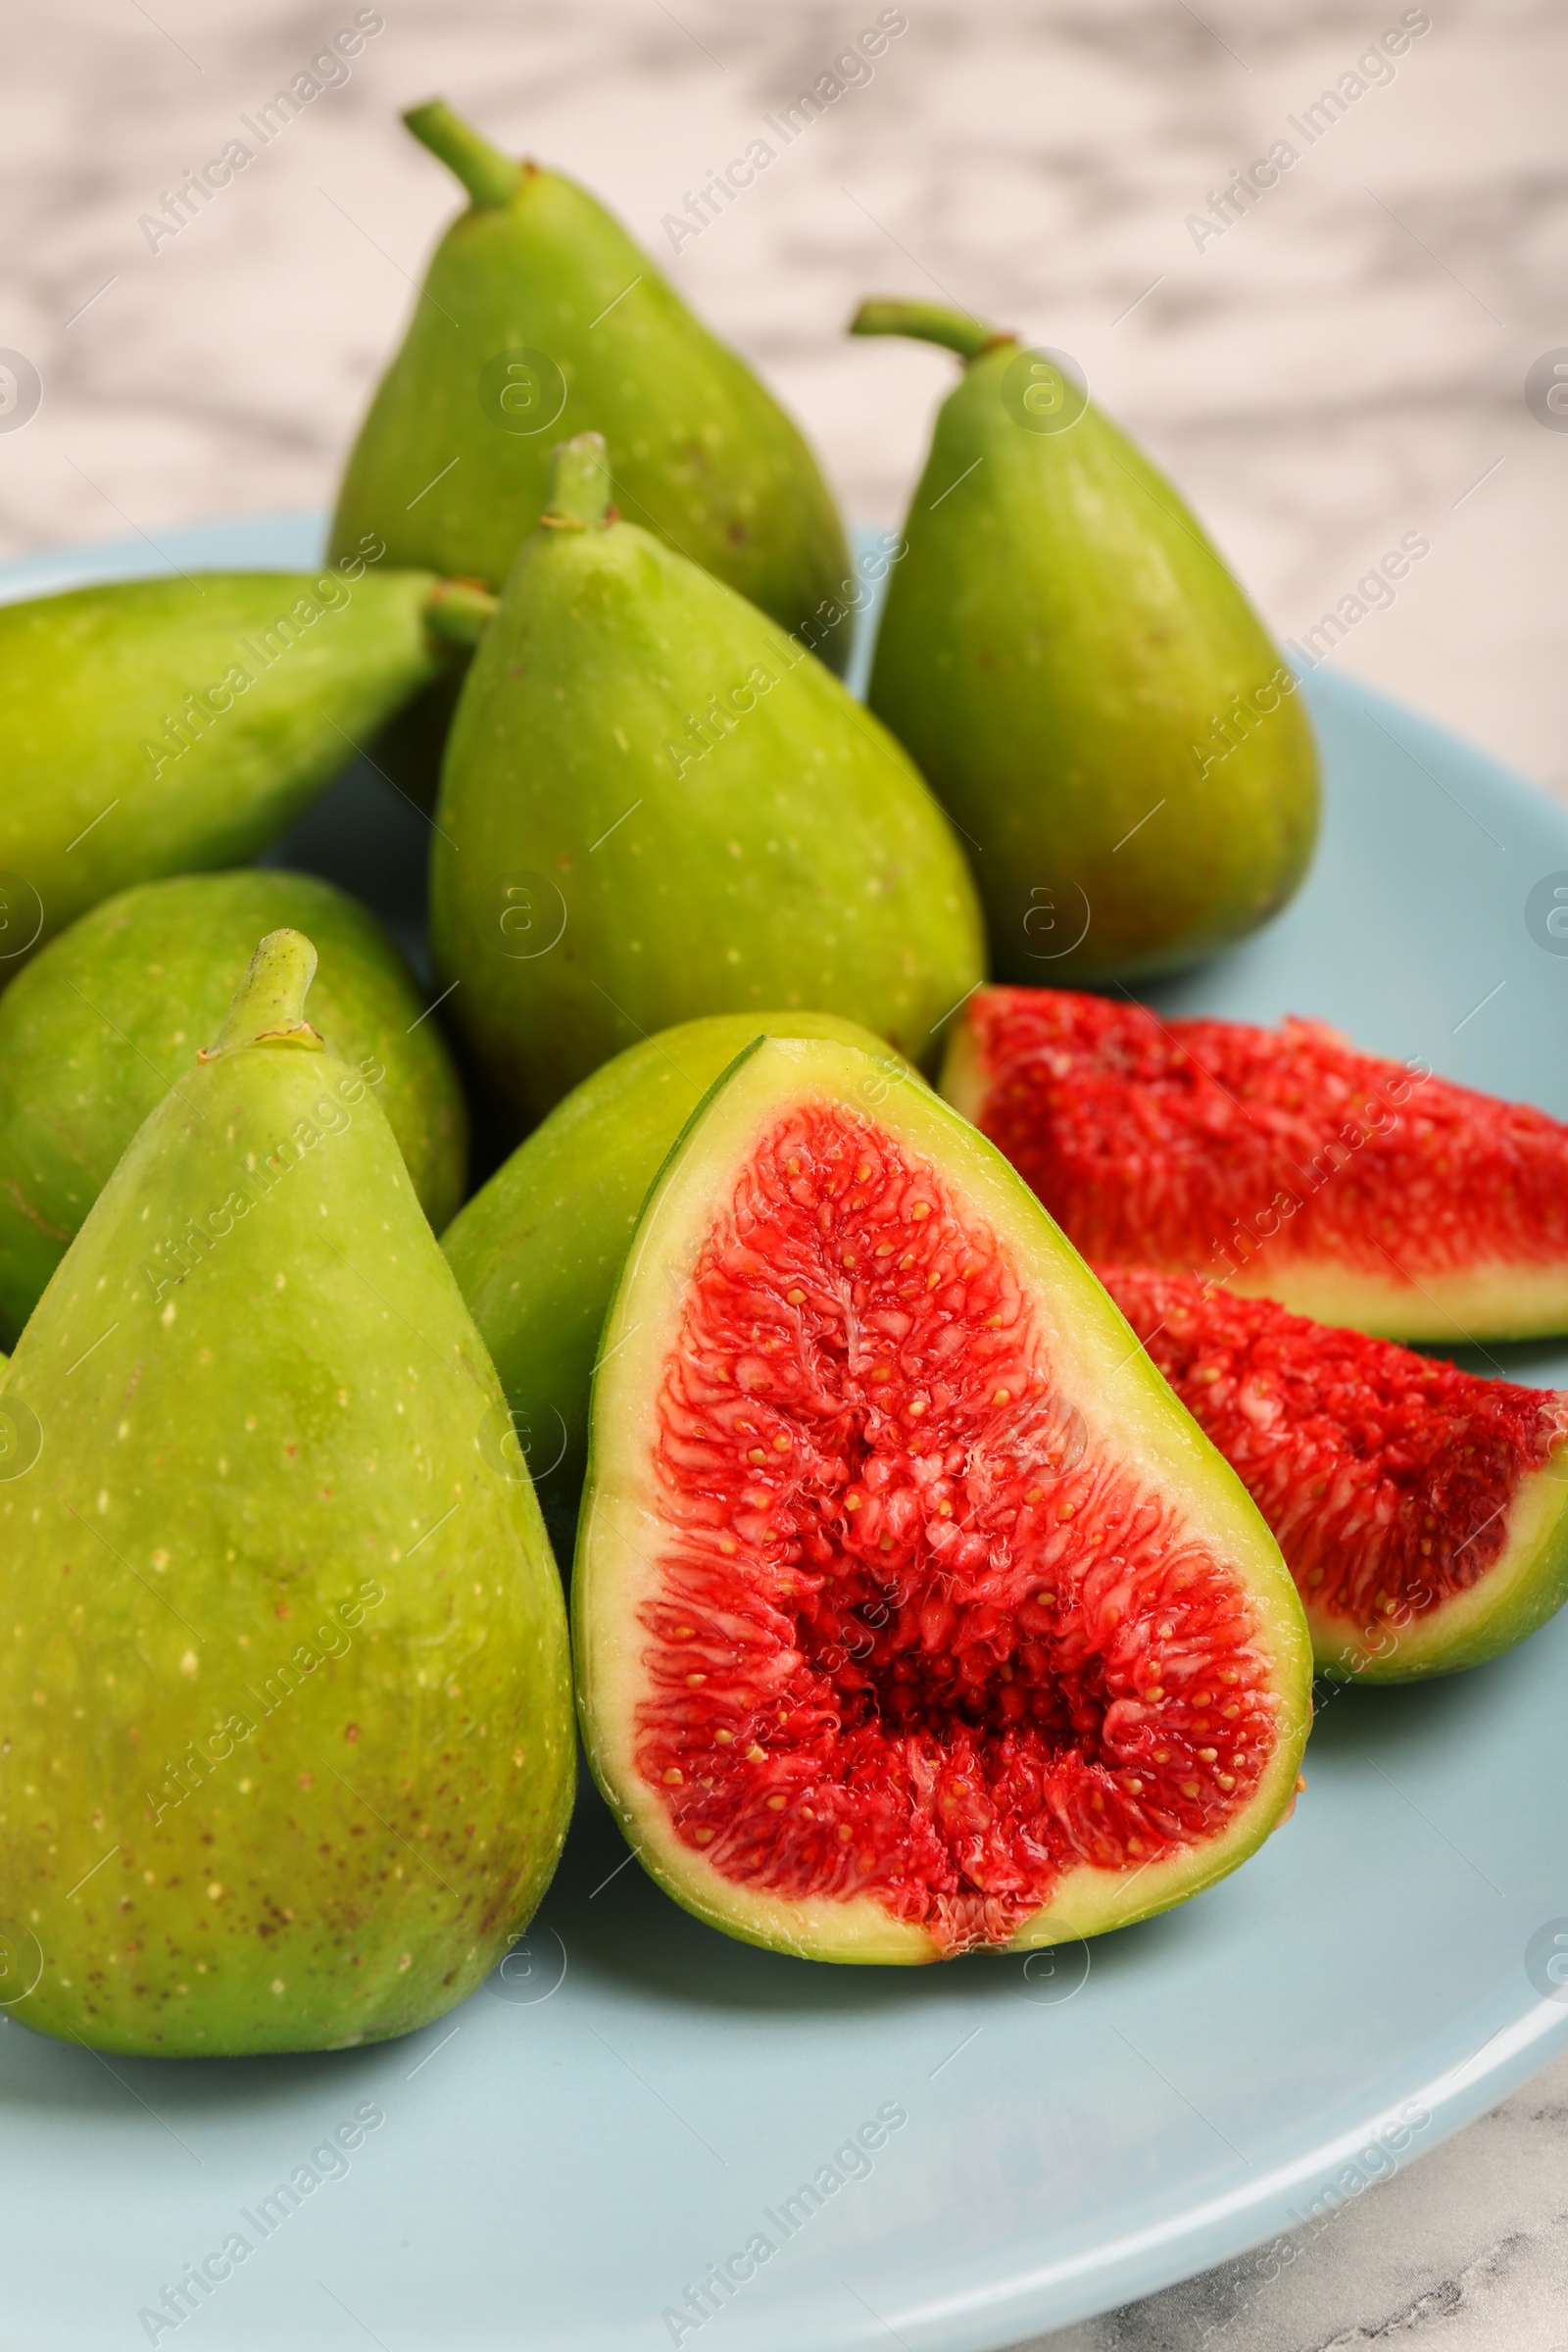 Photo of Cut and whole green figs on table, closeup